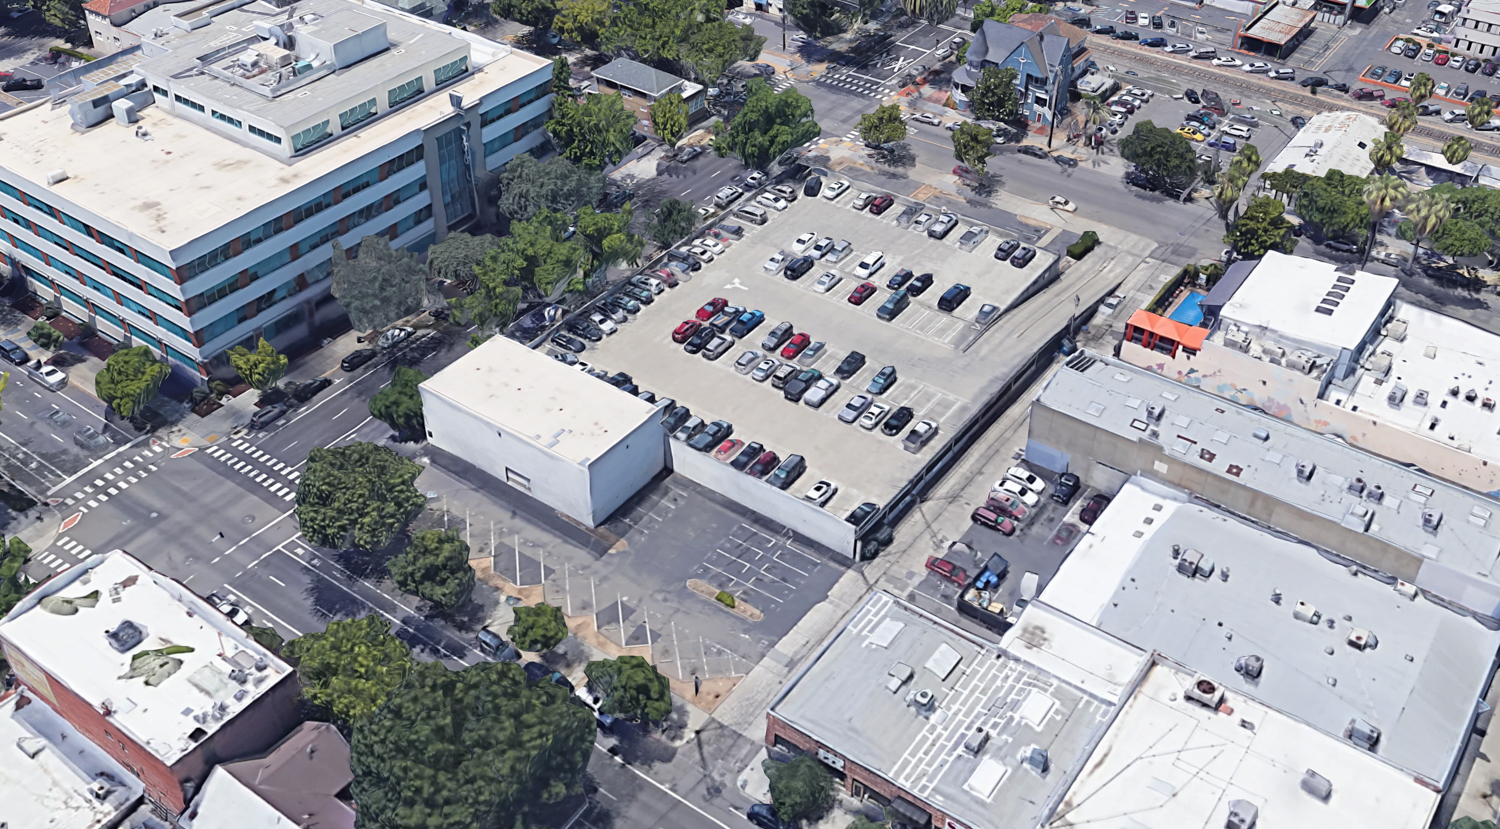 2025 L Street existing parking garage, aerial view from Google Satellite